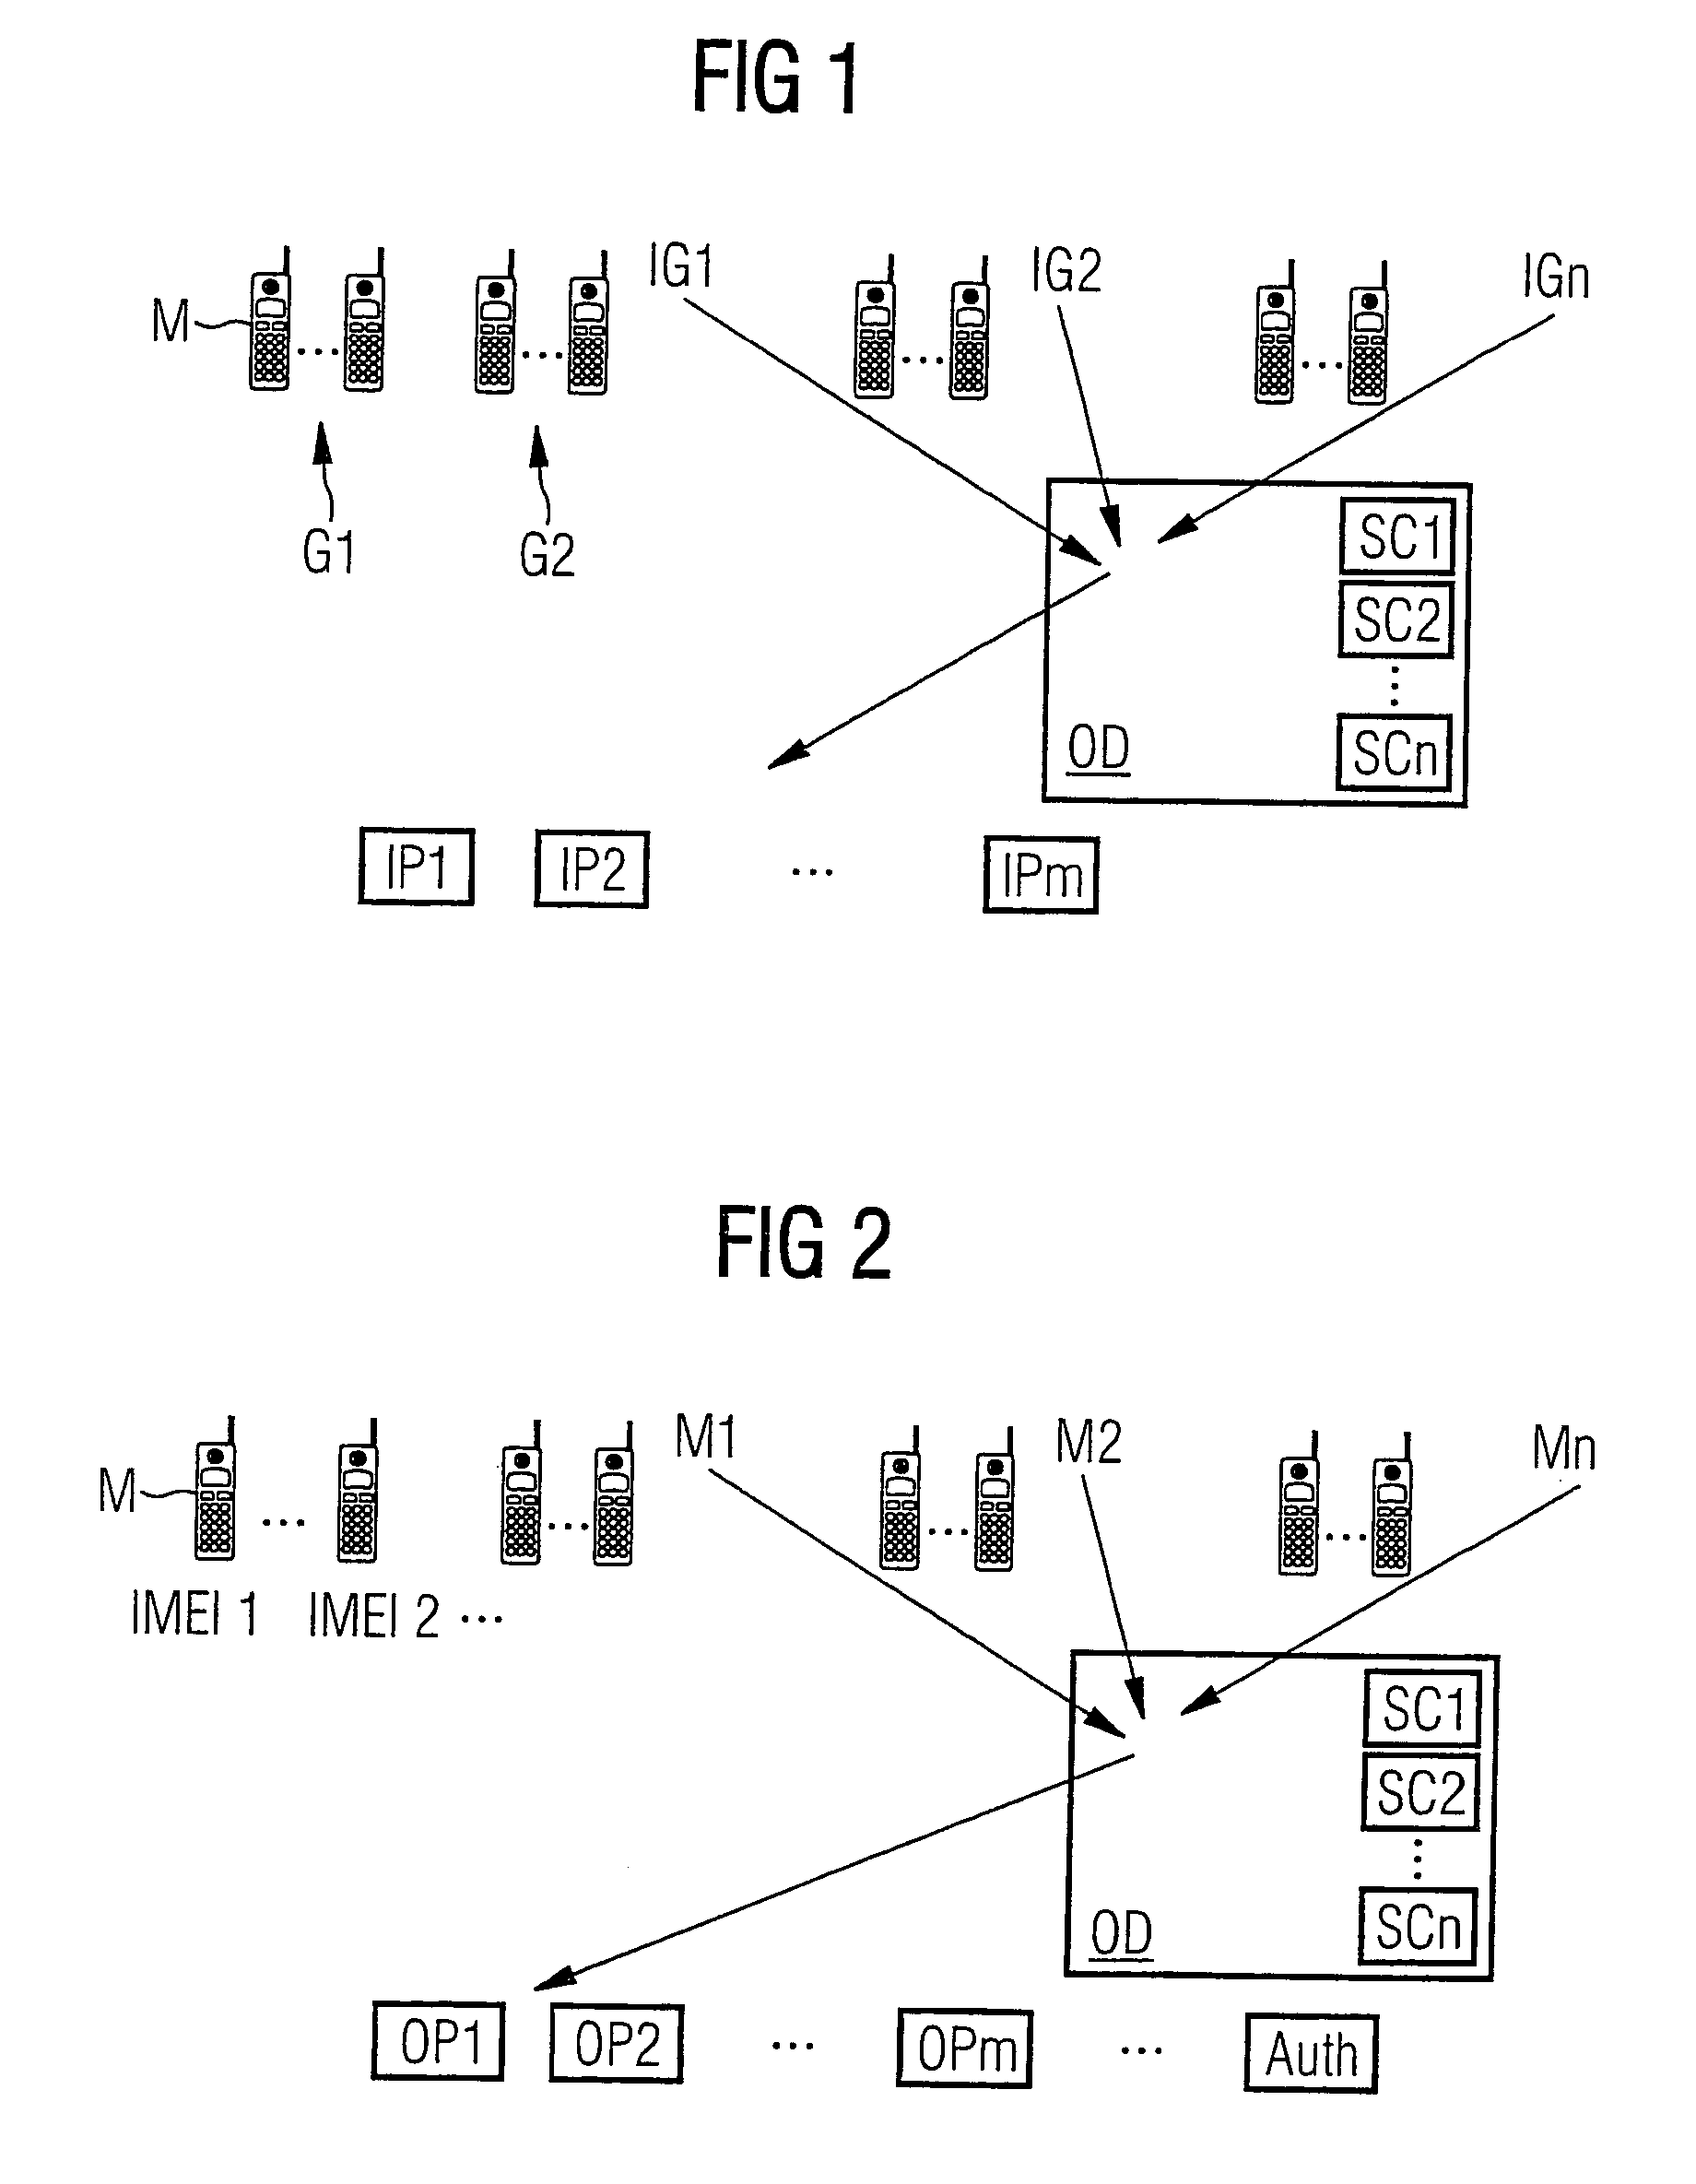 Method for cryptographically verifiable identification of a physical unit in a public, wireless telecommunications network